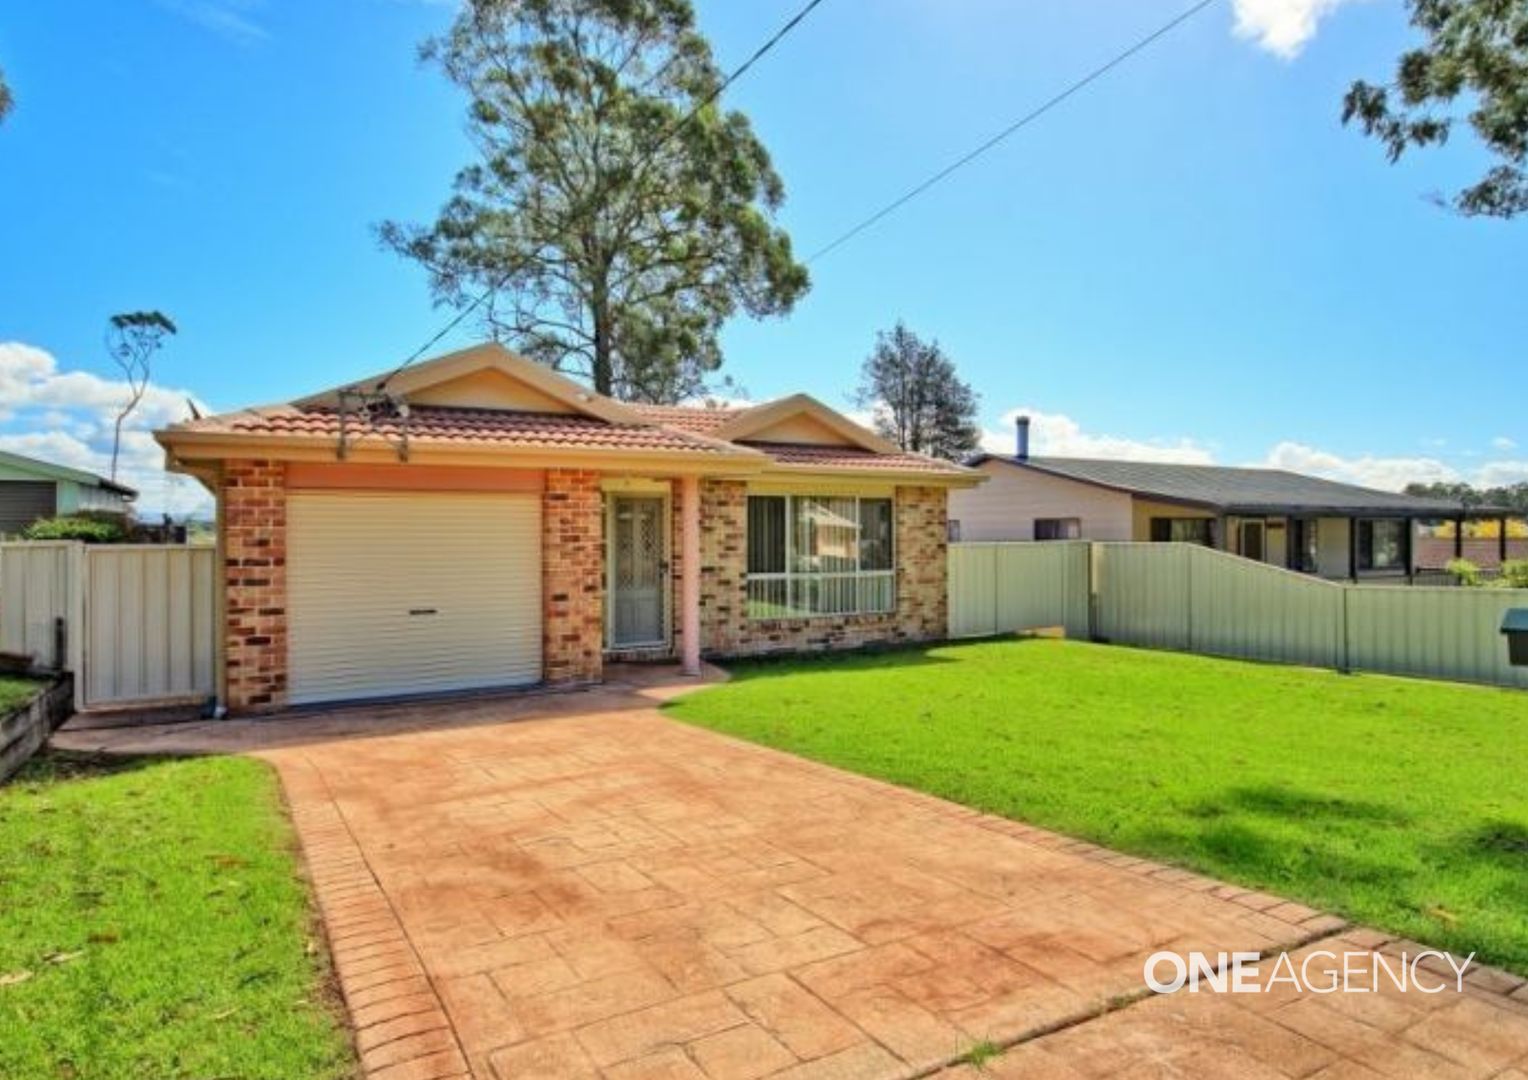 3 bedrooms House in 101 The Park Drive SANCTUARY POINT NSW, 2540